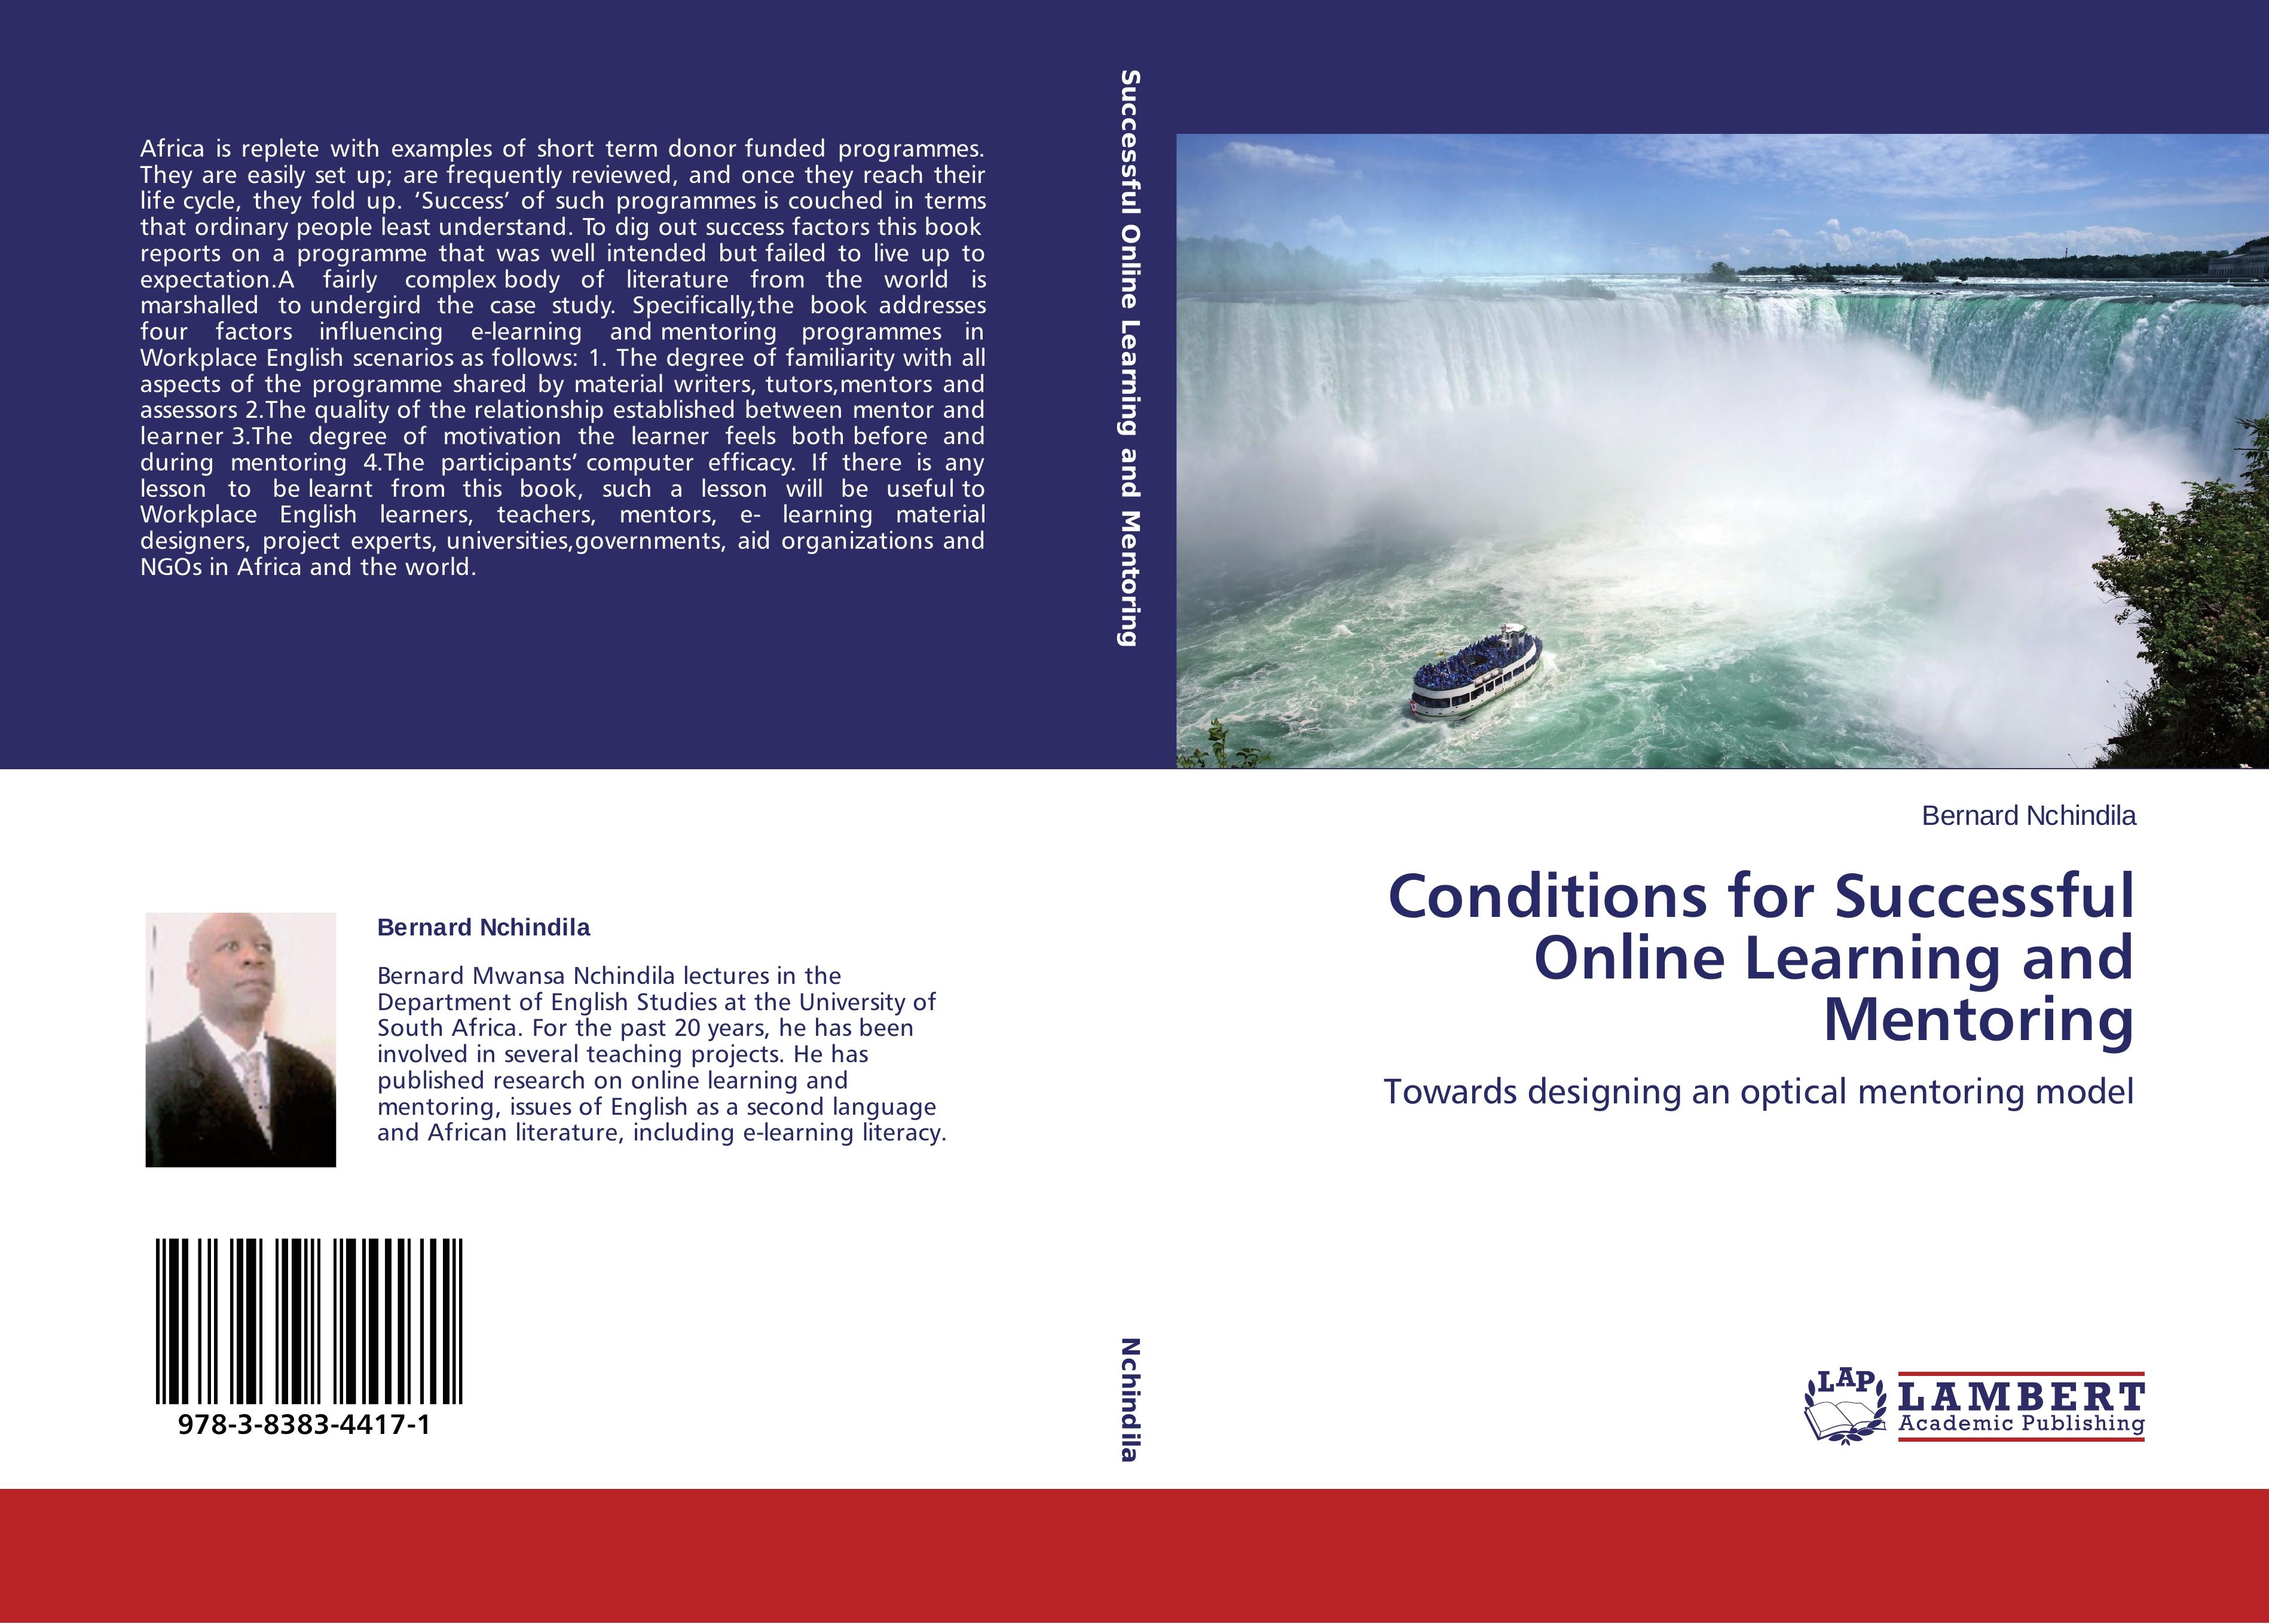 Conditions for Successful Online Learning and Mentoring - Bernard Nchindila